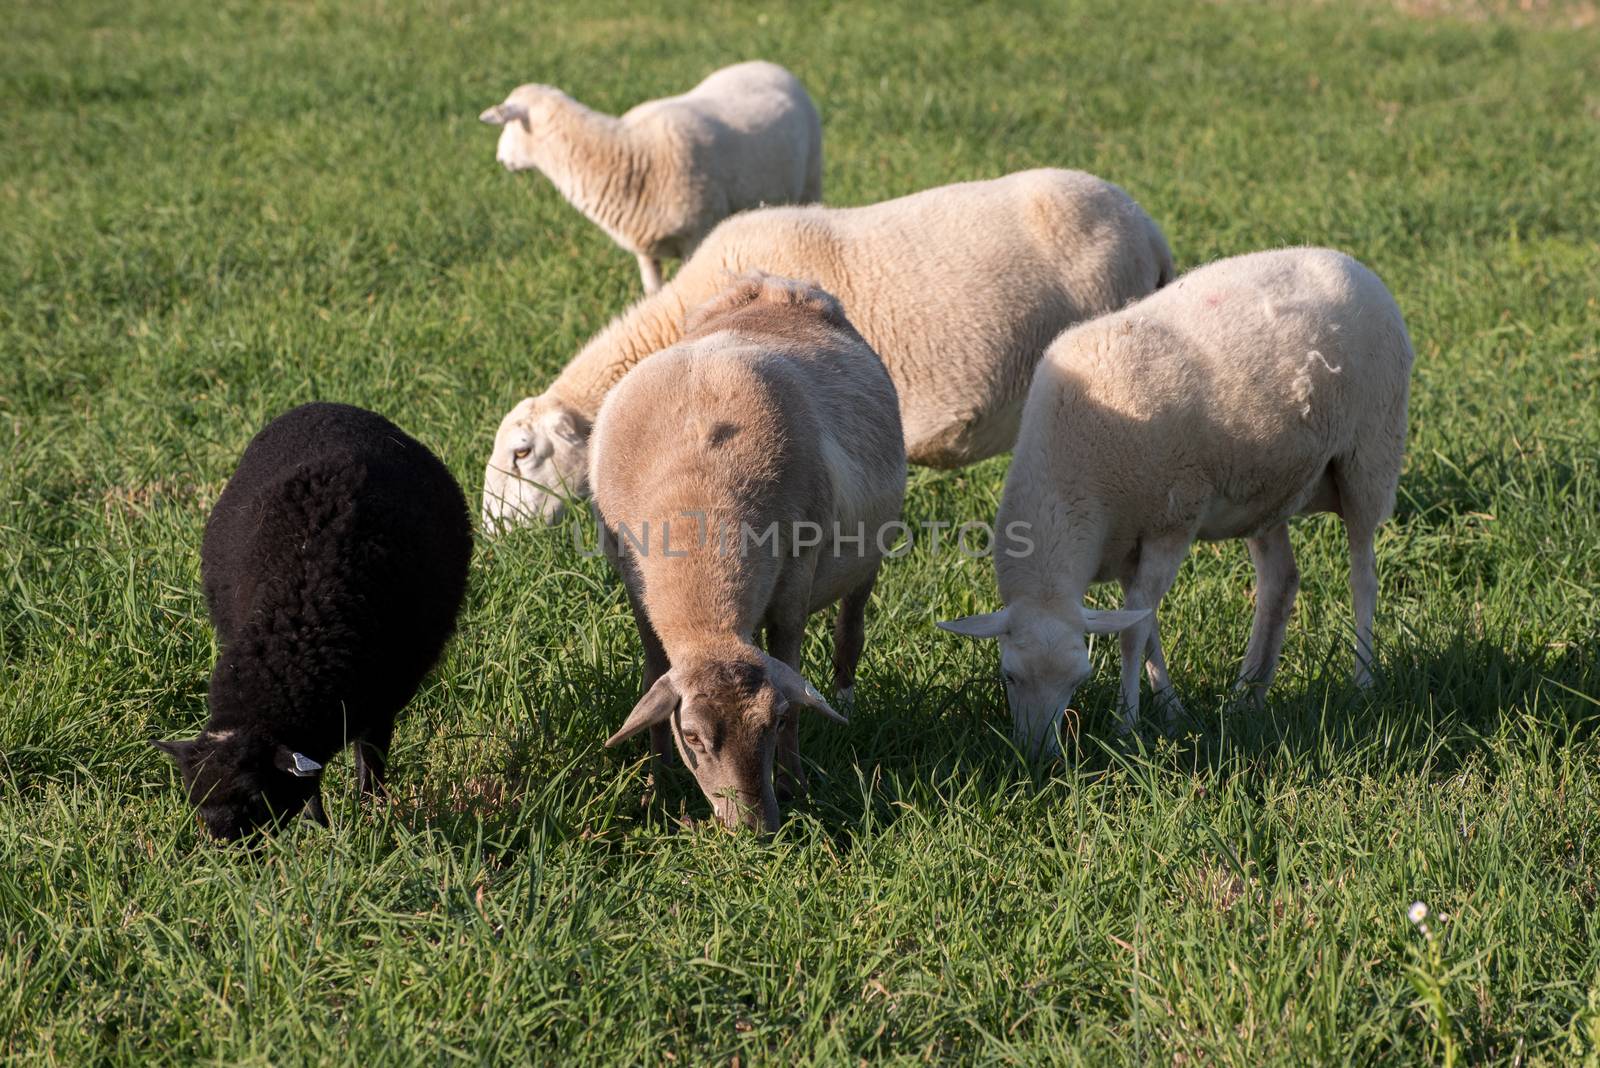 Ewes and lambs in a grassy field.